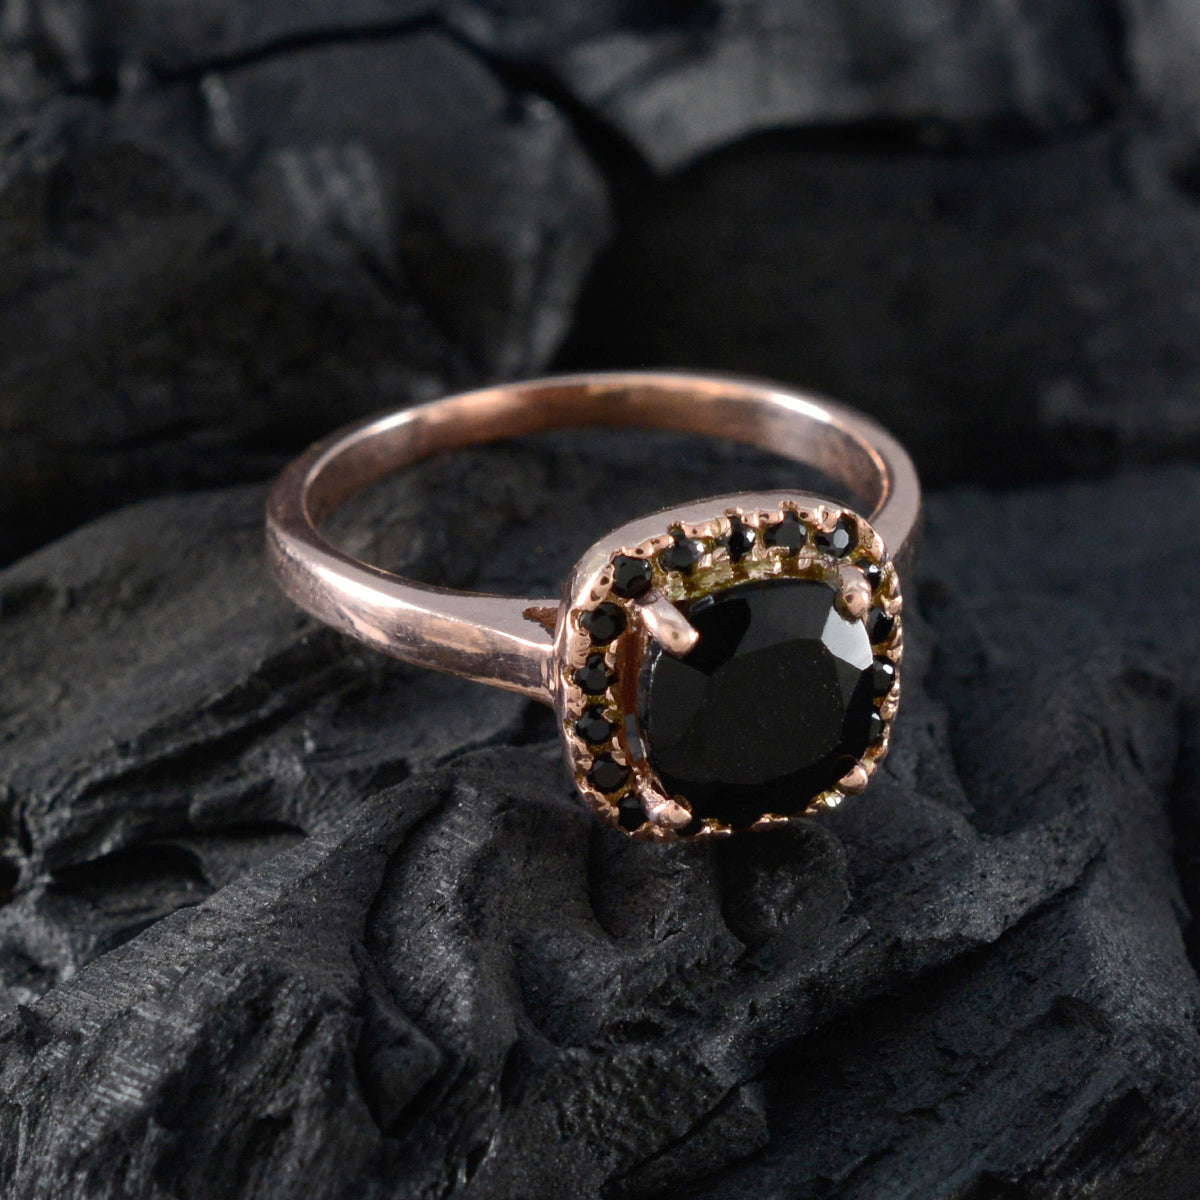 Riyo Superb Silver Ring With Rose Gold Plating Black Onyx Stone Cushion Shape Prong Setting Custom Jewelry Cocktail Ring